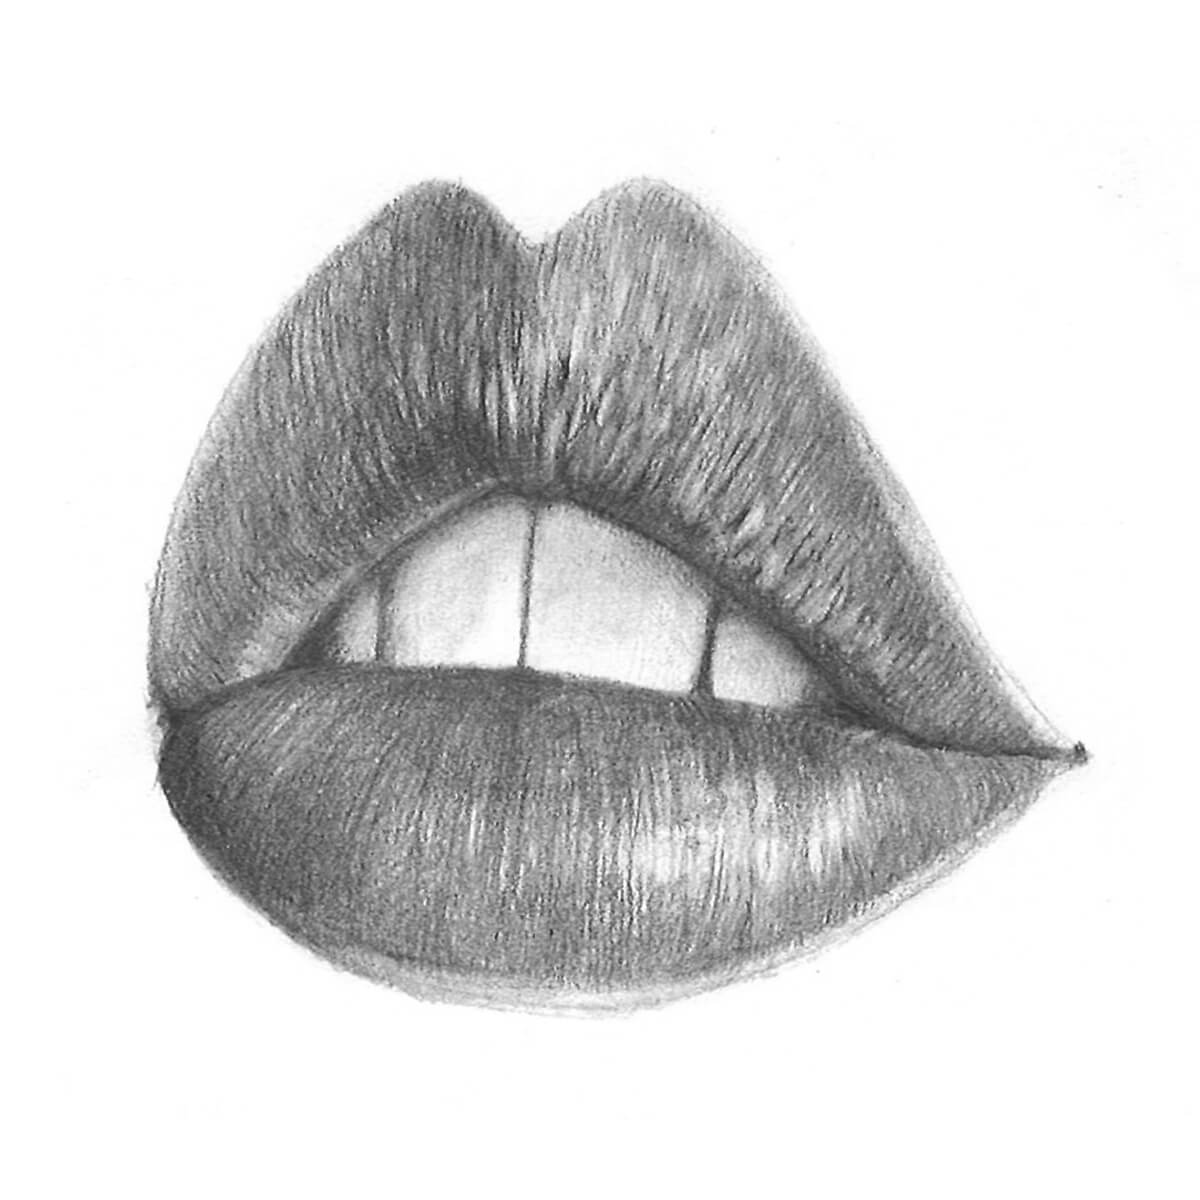 how to draw lips from the side